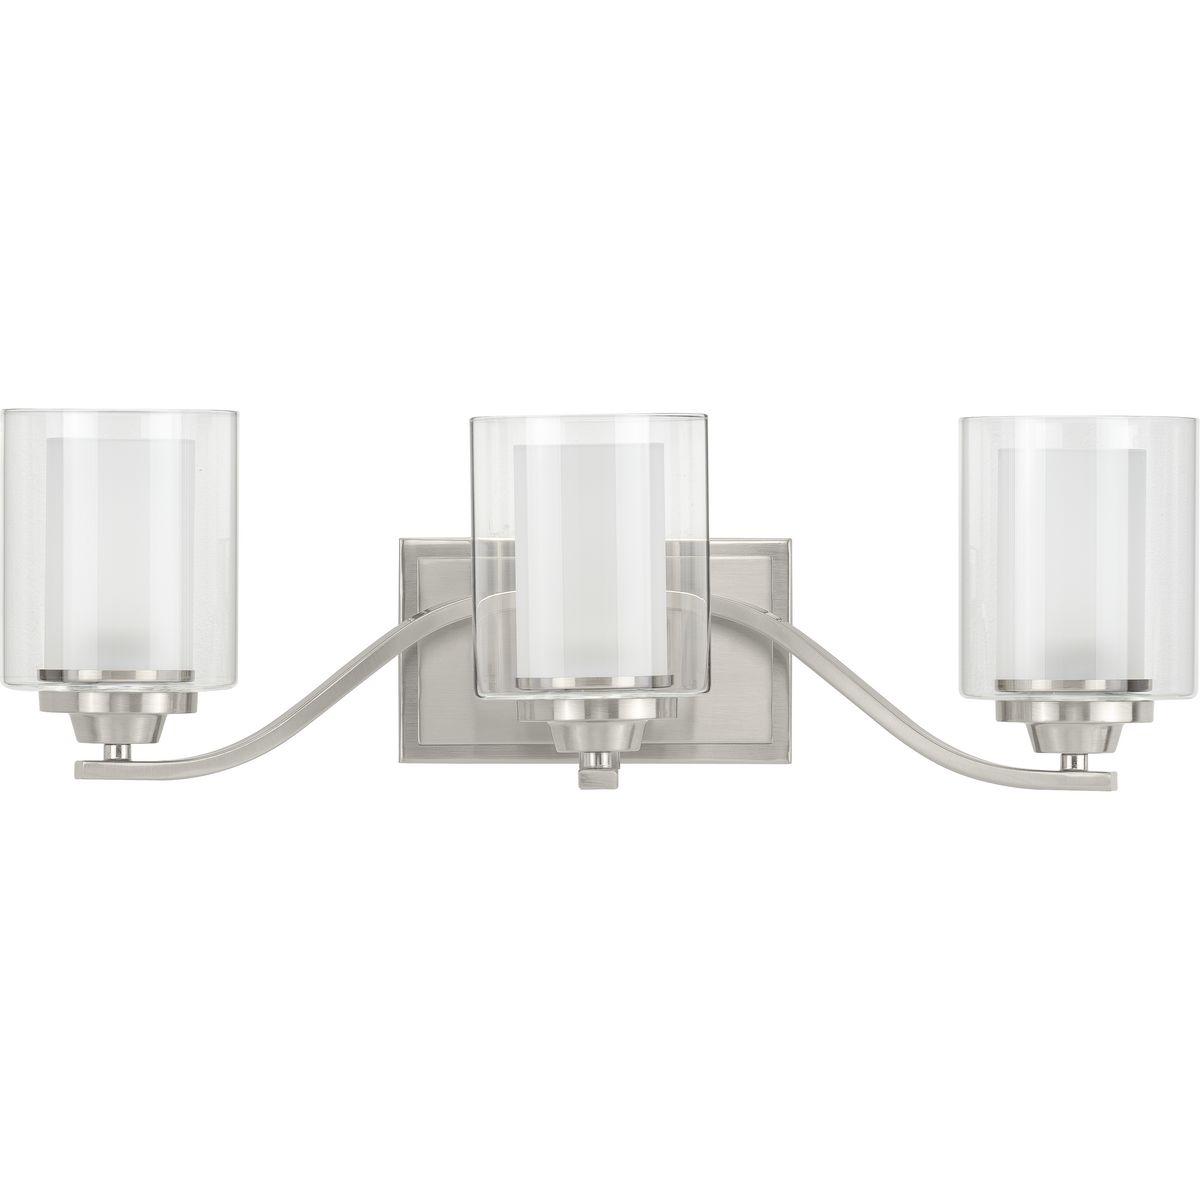 Hubbell P300122-009 Add a modern romance to the heart of your home with this lovely wall bracket. Quiet etched glass diffusers are surrounded by clear outer shades for a soft, luxurious touch. The shades sit on an elegant brushed nickel frame with a rectangular backplate.  ;